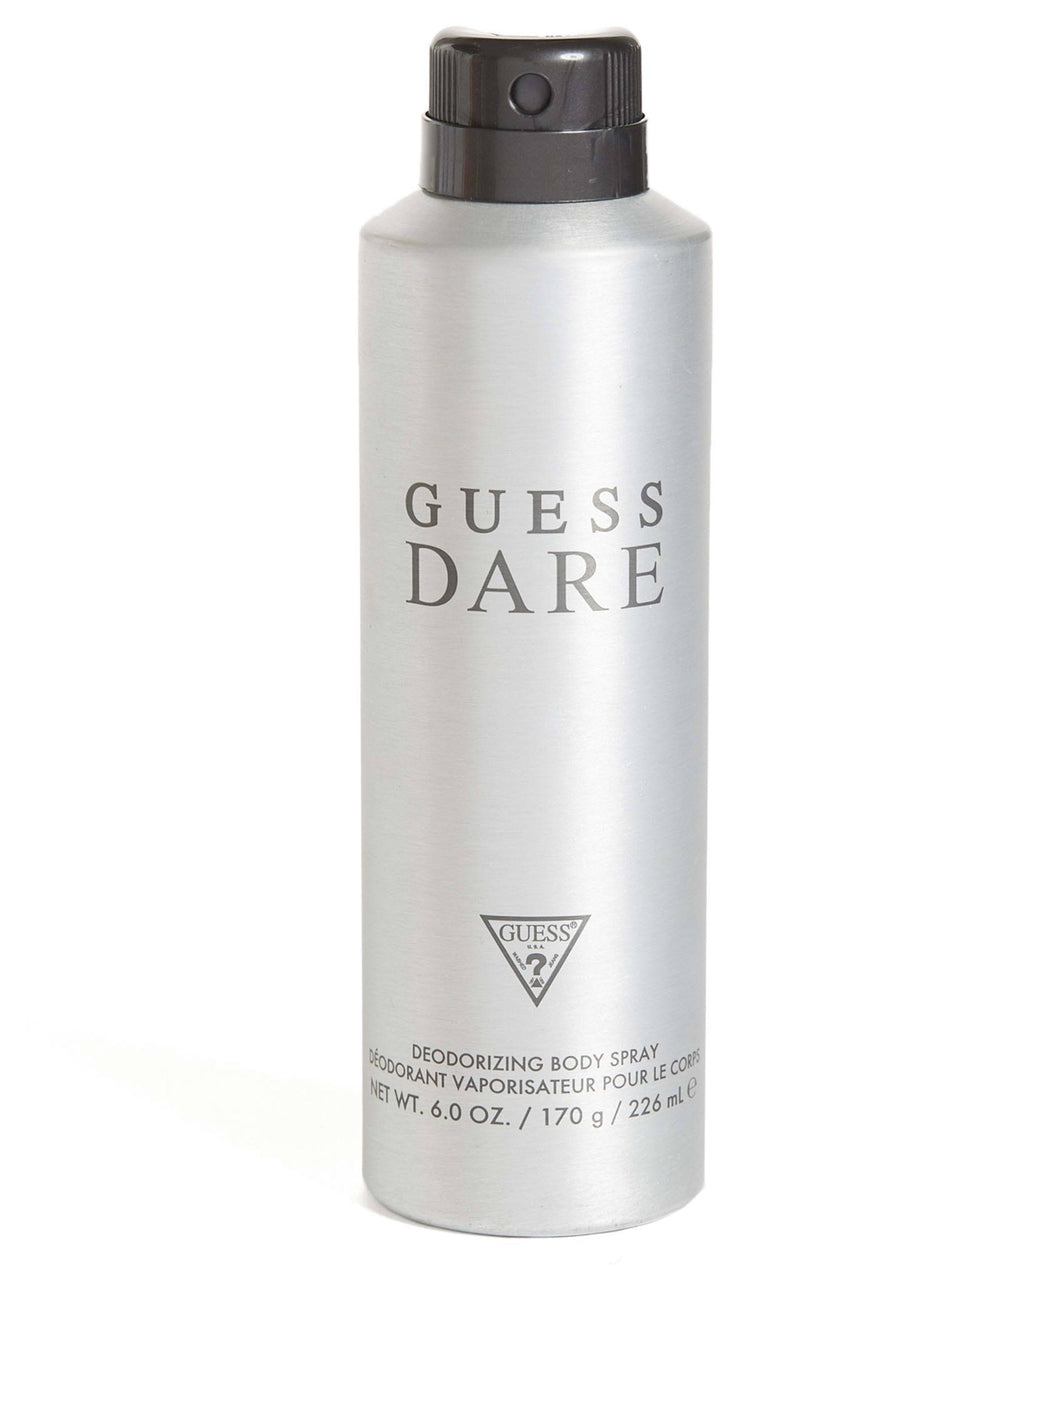 Guess Dare For Men 170g B/S- (DAMAGE)